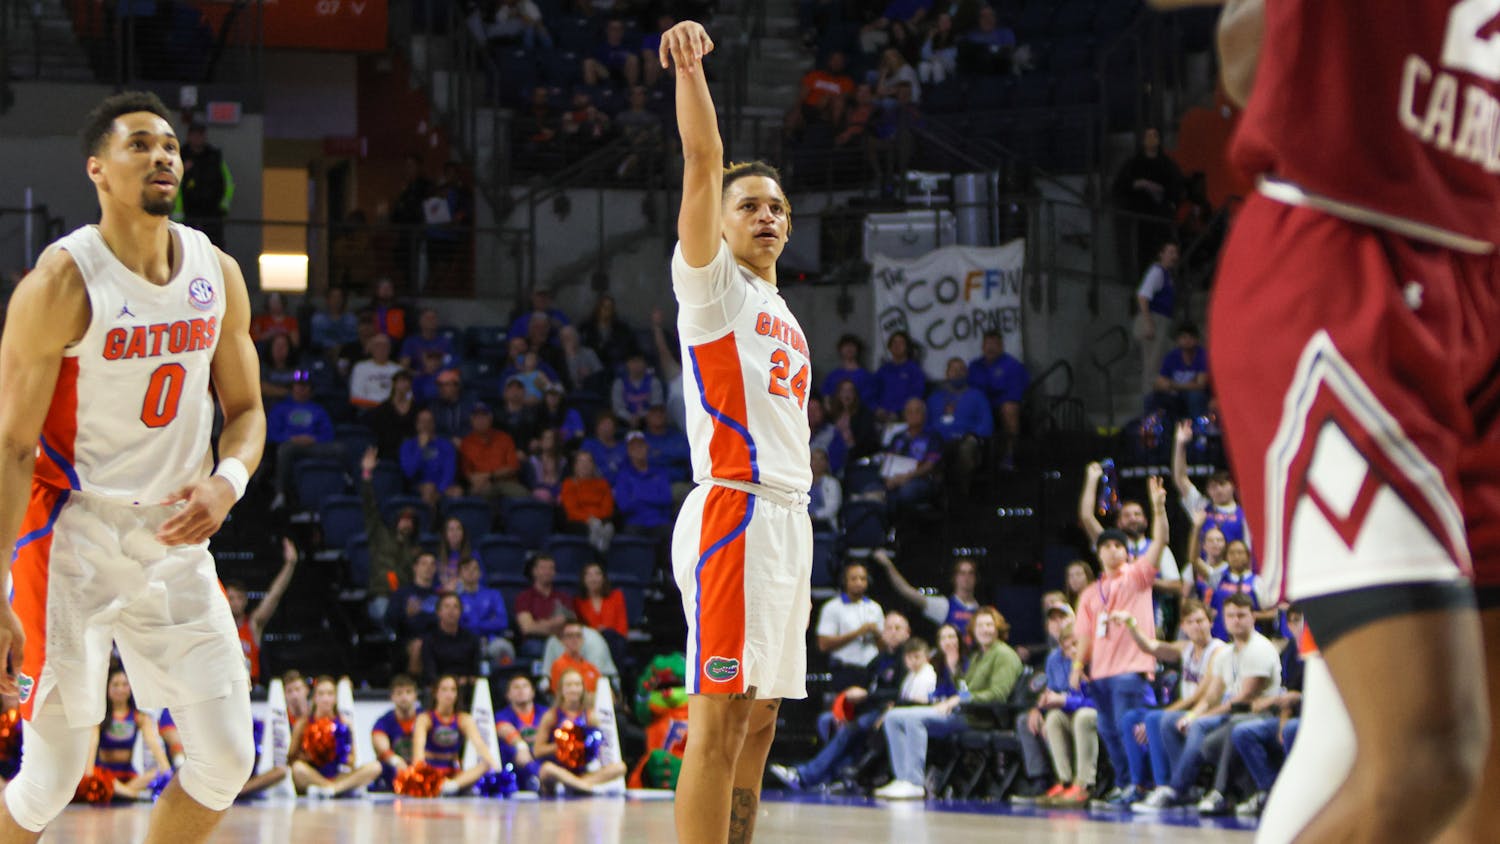 Florida guard Riley Kugel puts up a shot in the Gators 81-60 win against the South Carolina Gamecocks Wednesday, Jan. 25, 2023.